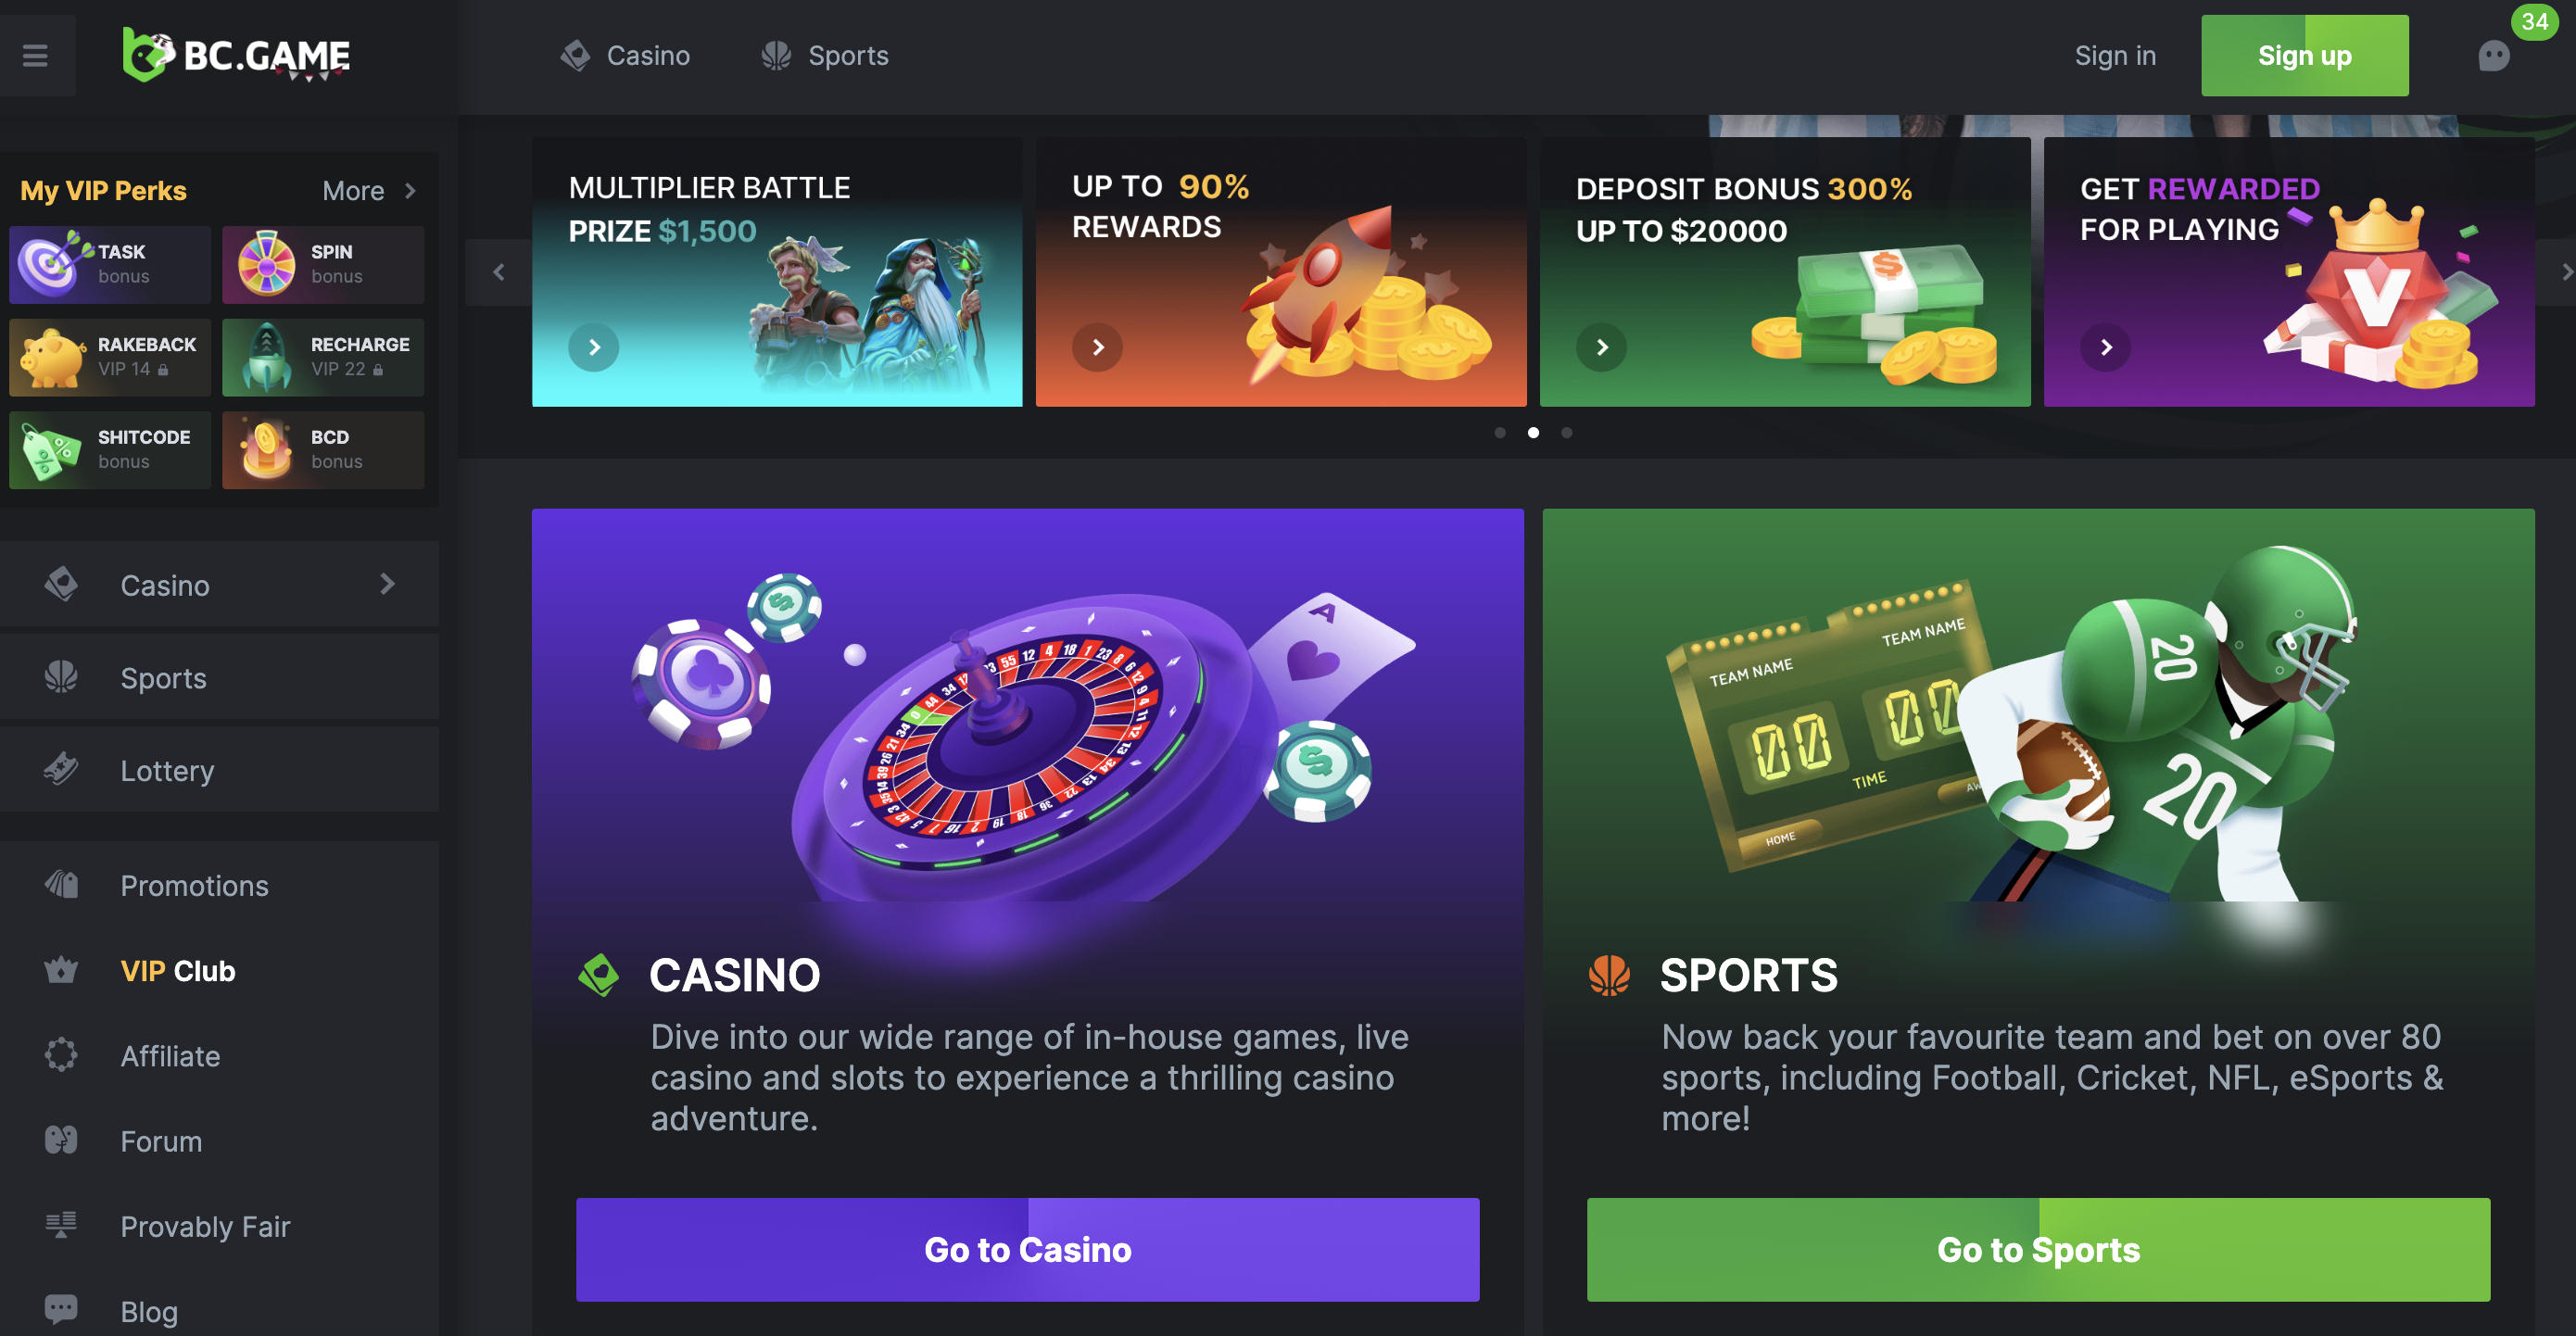 bc.game crypto casino and sports betting